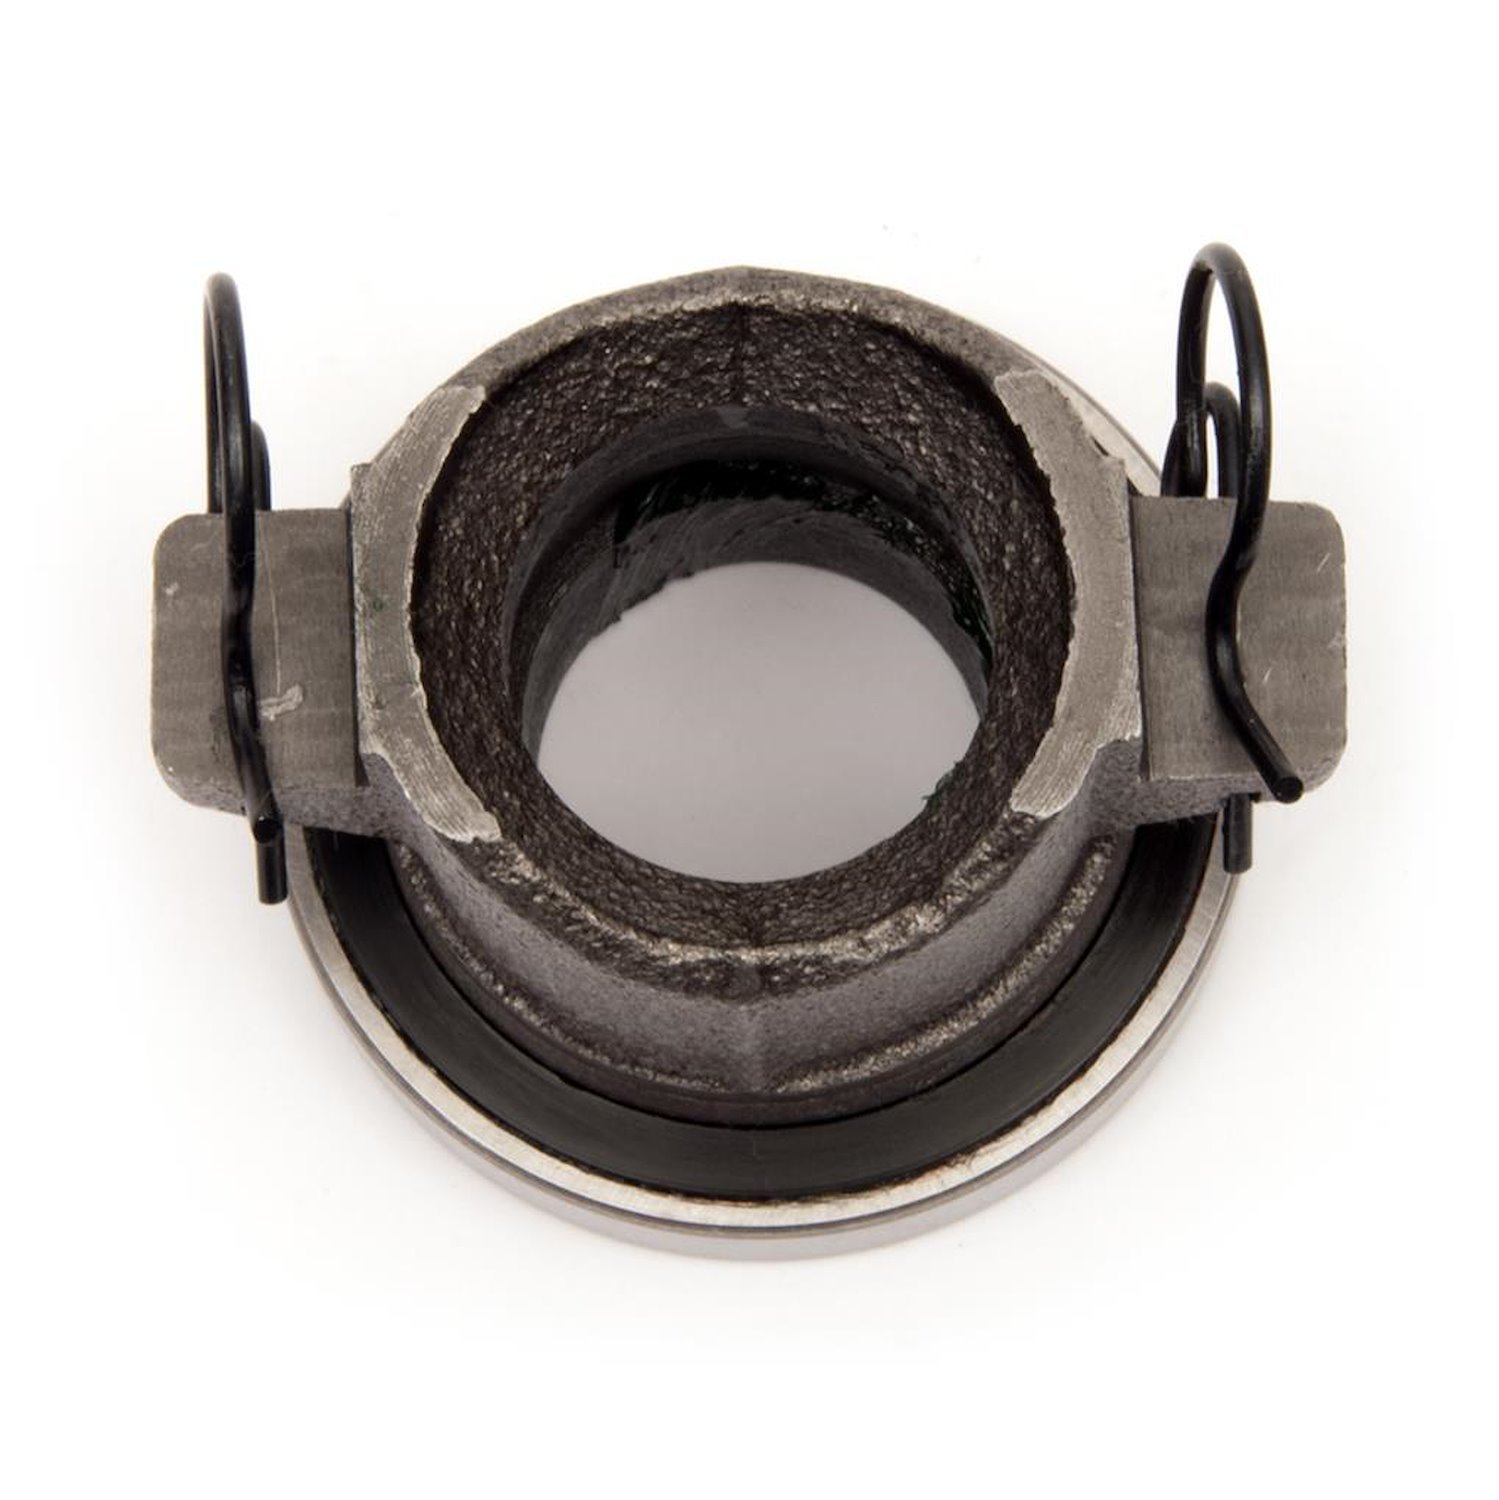 Throwout Bearing 1960-1992 Chrysler, Dodge and Plymouth